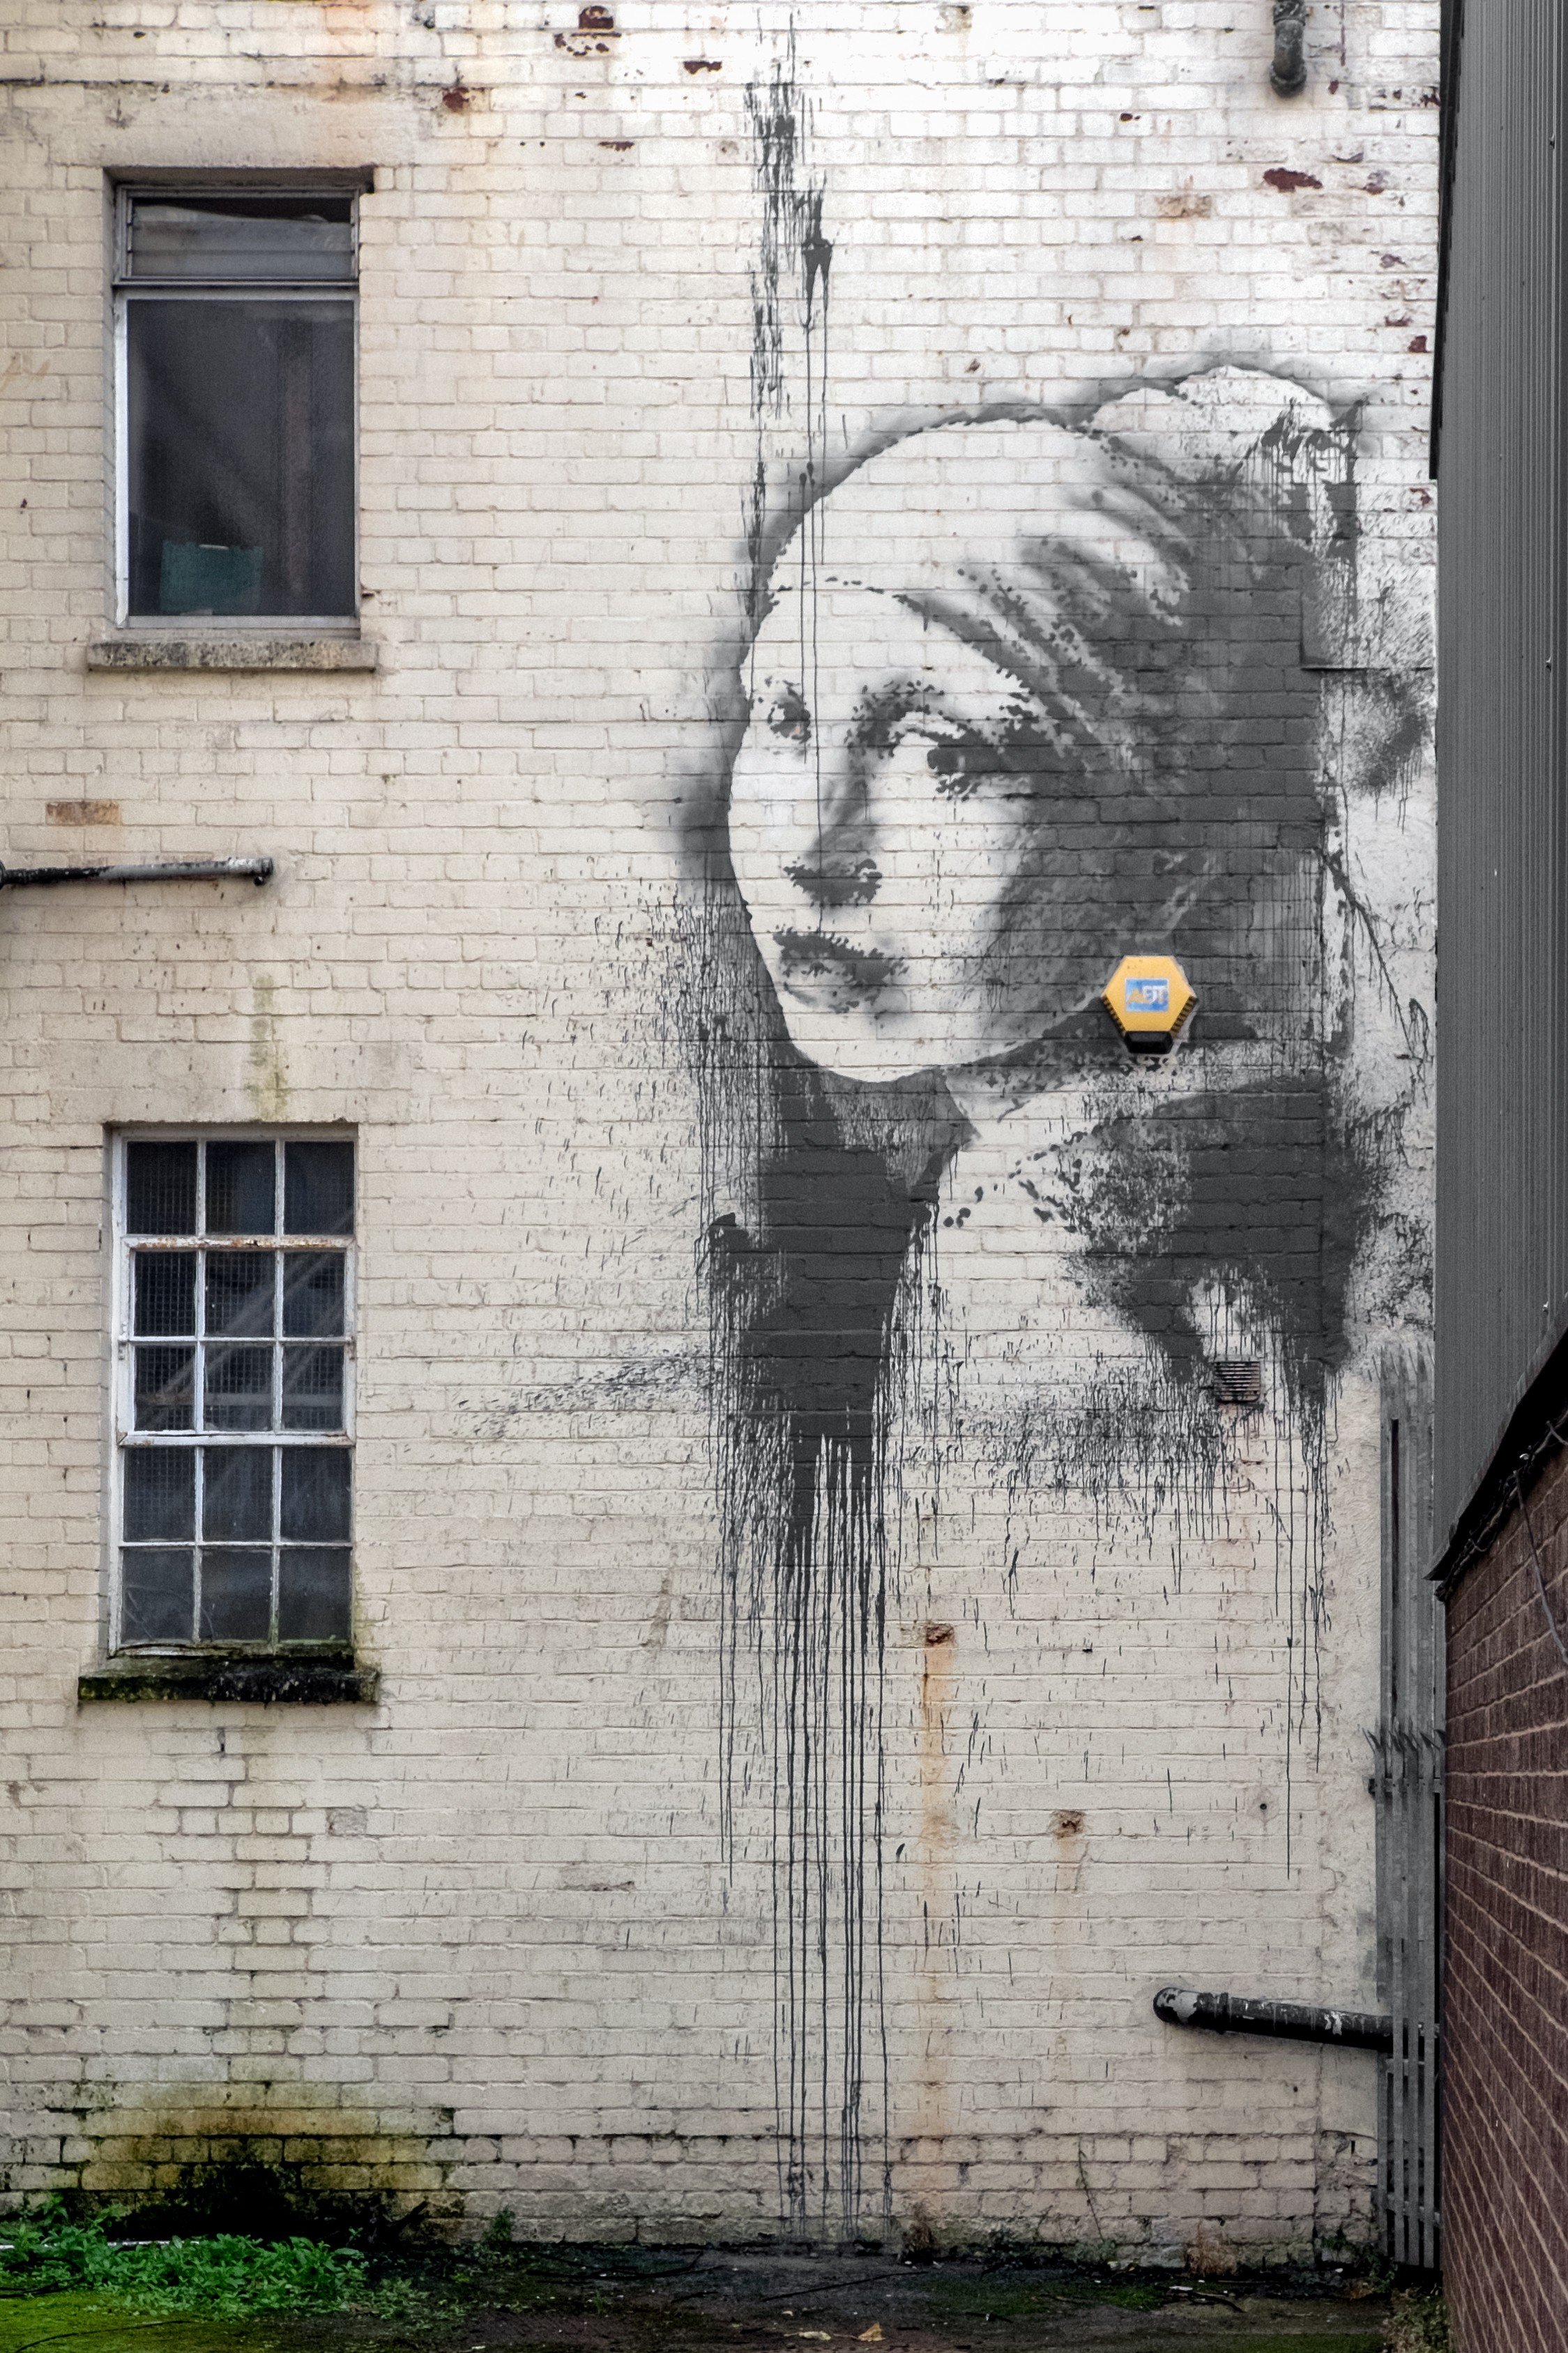 The new Banksy depicting the painting 'Girl with a Pearl Earring' by Dutch painter Johannes Vermeer is see on a wall in Bristol Harbourside, England on Oct. 20, 2014.